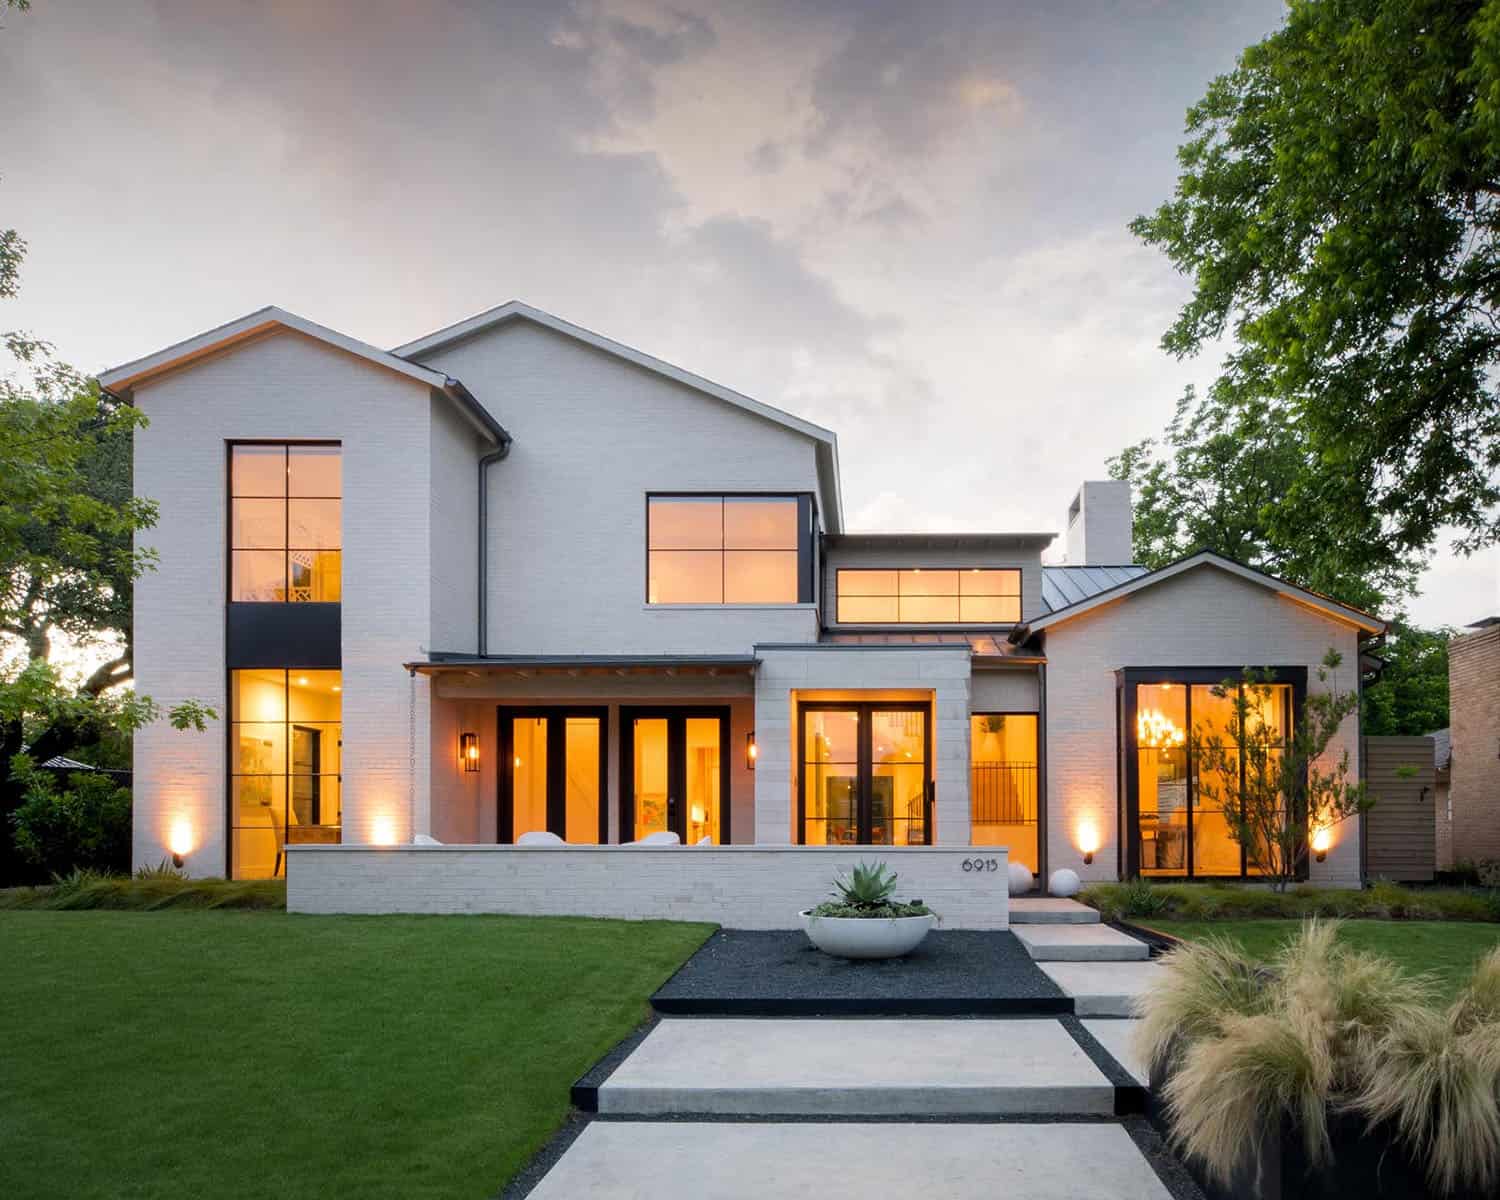 California-modern meets Texas in this absolutely gorgeous Dallas home